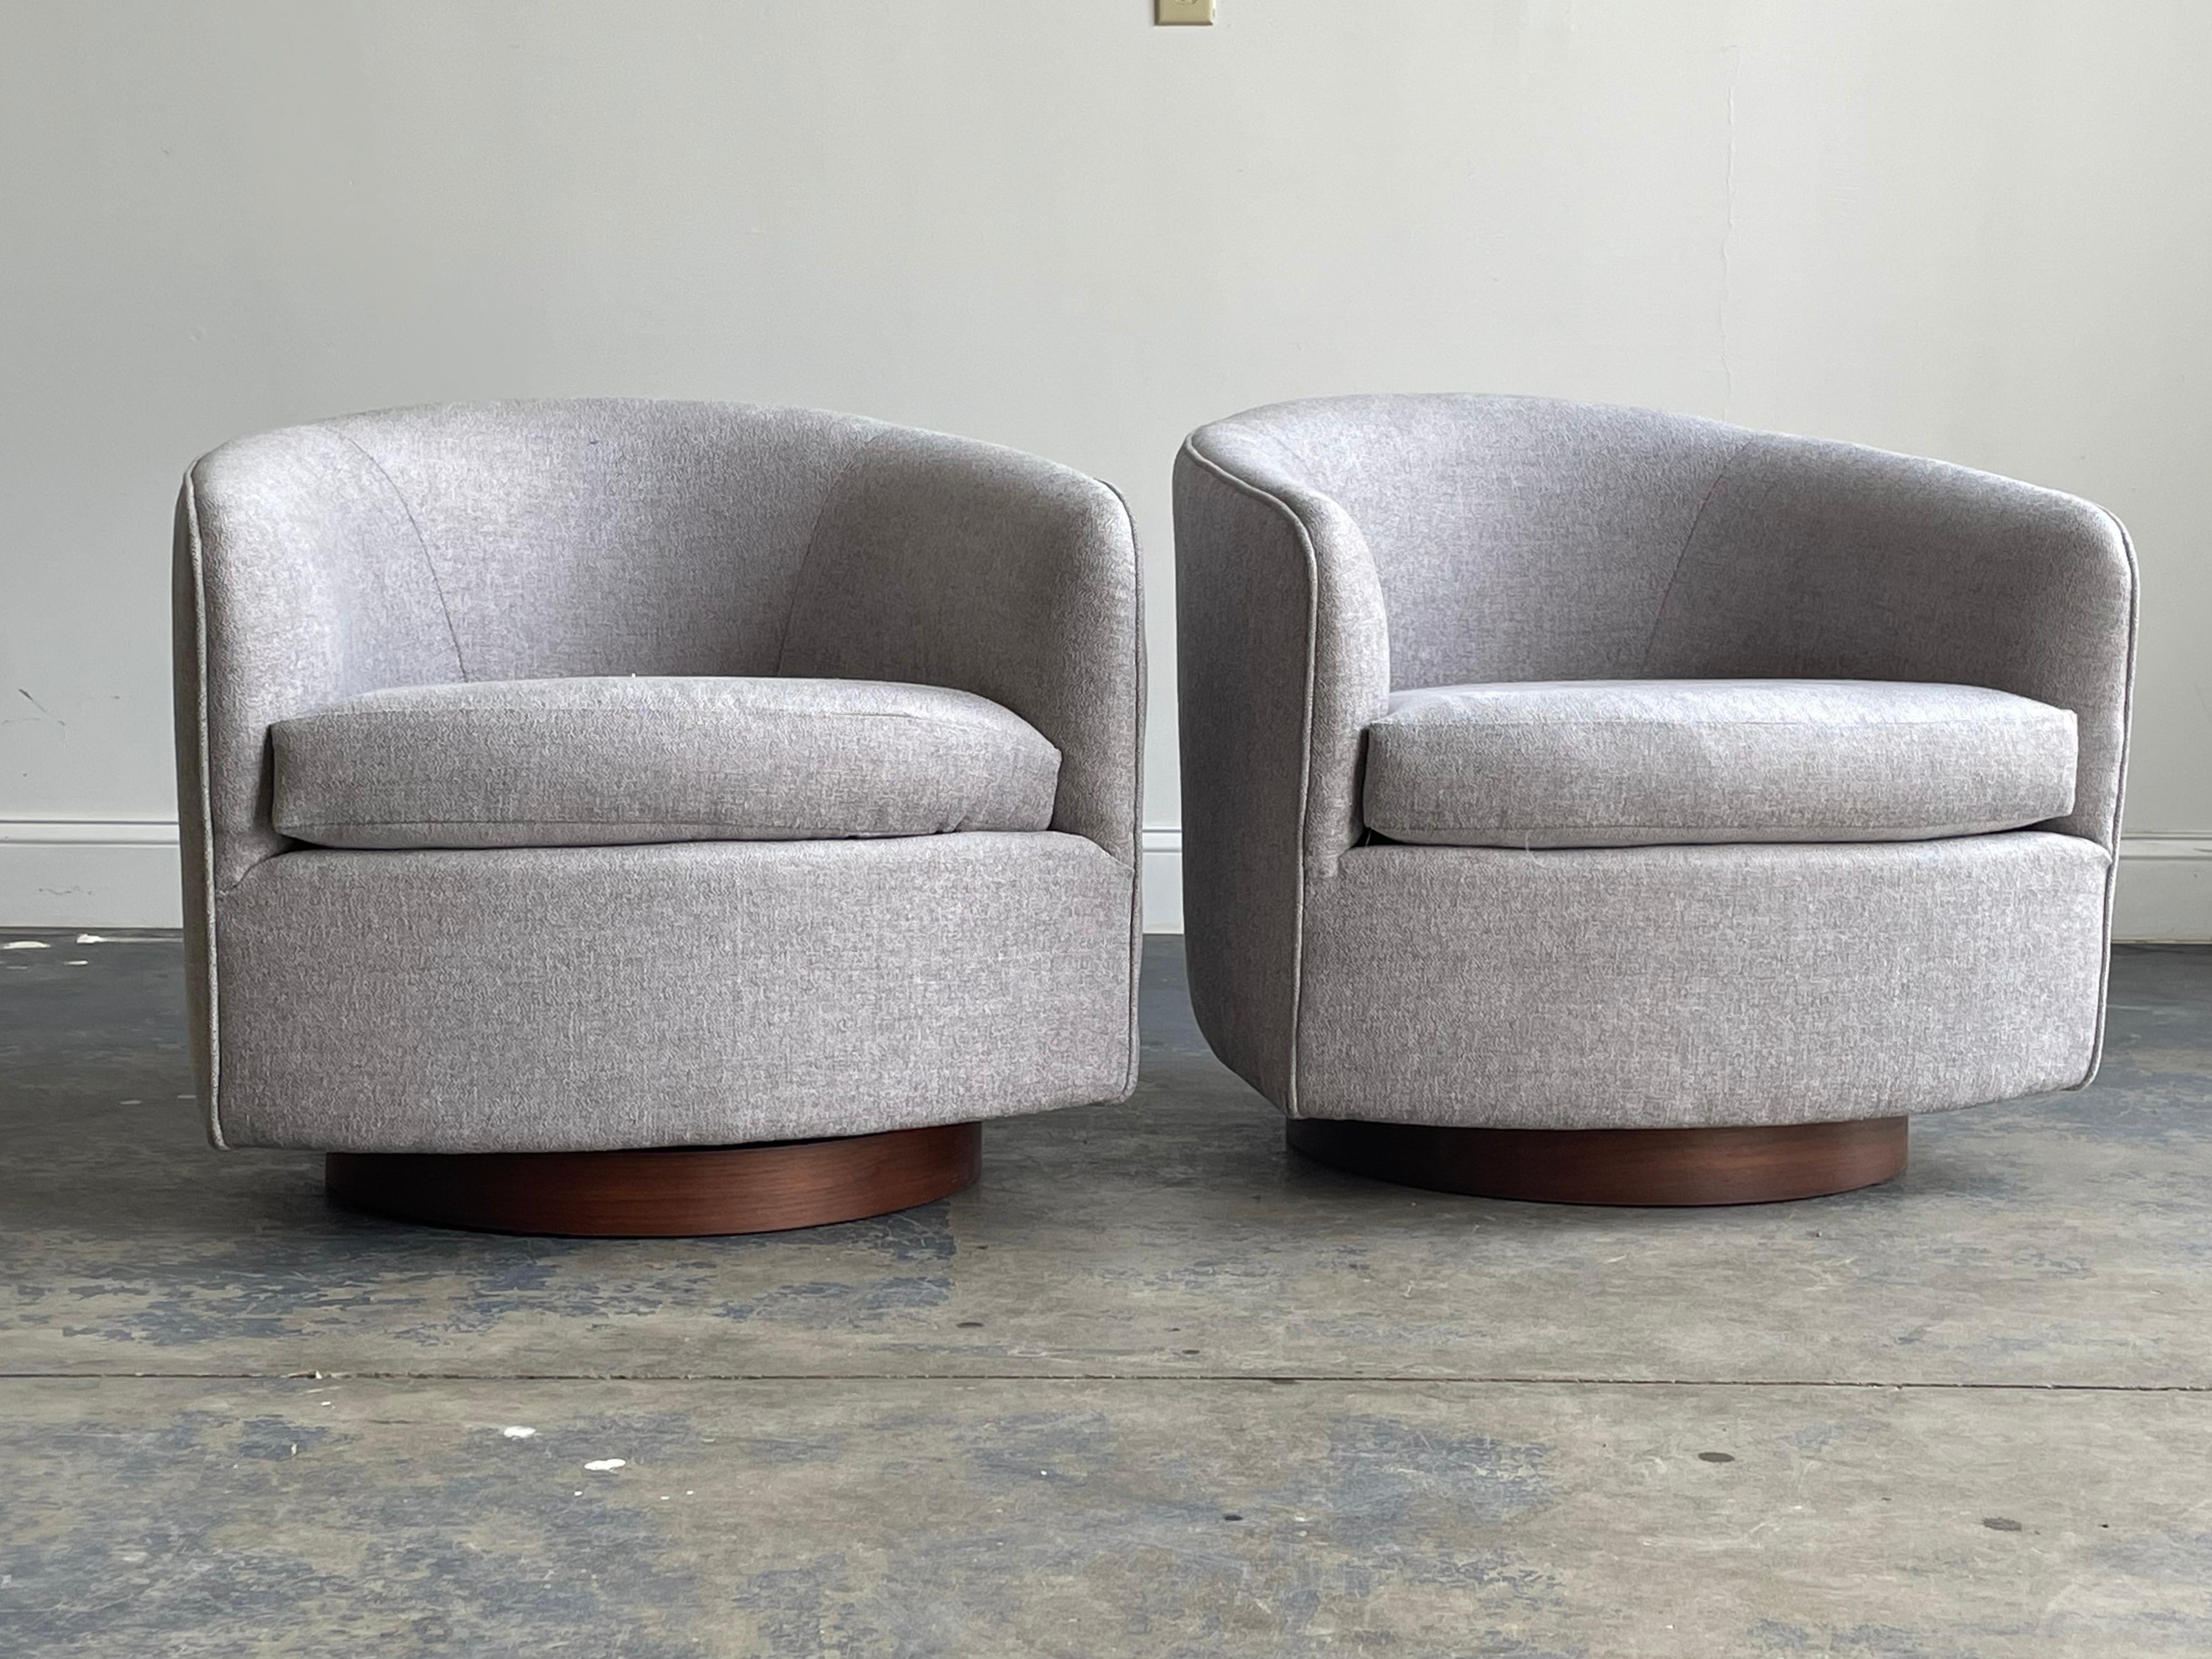 Upholstery Milo Baughman for Thayer Coggin Swivel and Tilt Chairs